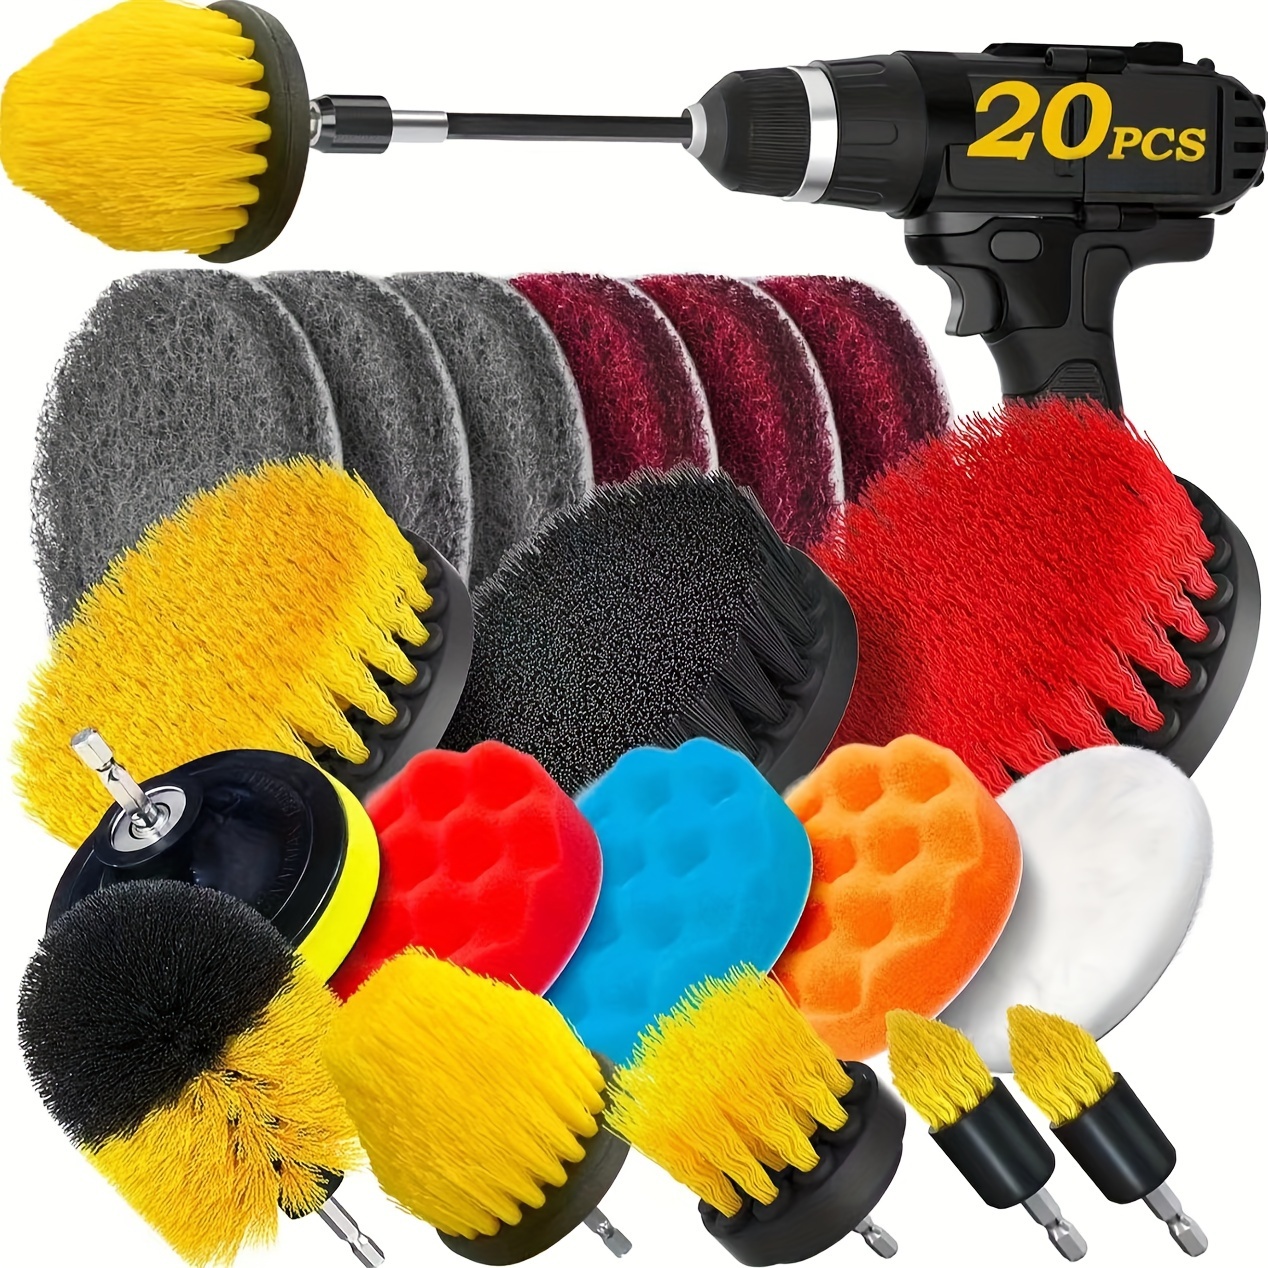 

20-piece Drill Brush Attachment Set, Multi-purpose Power Scrubbing Cleaning Kit With Extension Attachment For Bathroom, Toilet, Kitchen, Car, Patio - No Electricity Needed.